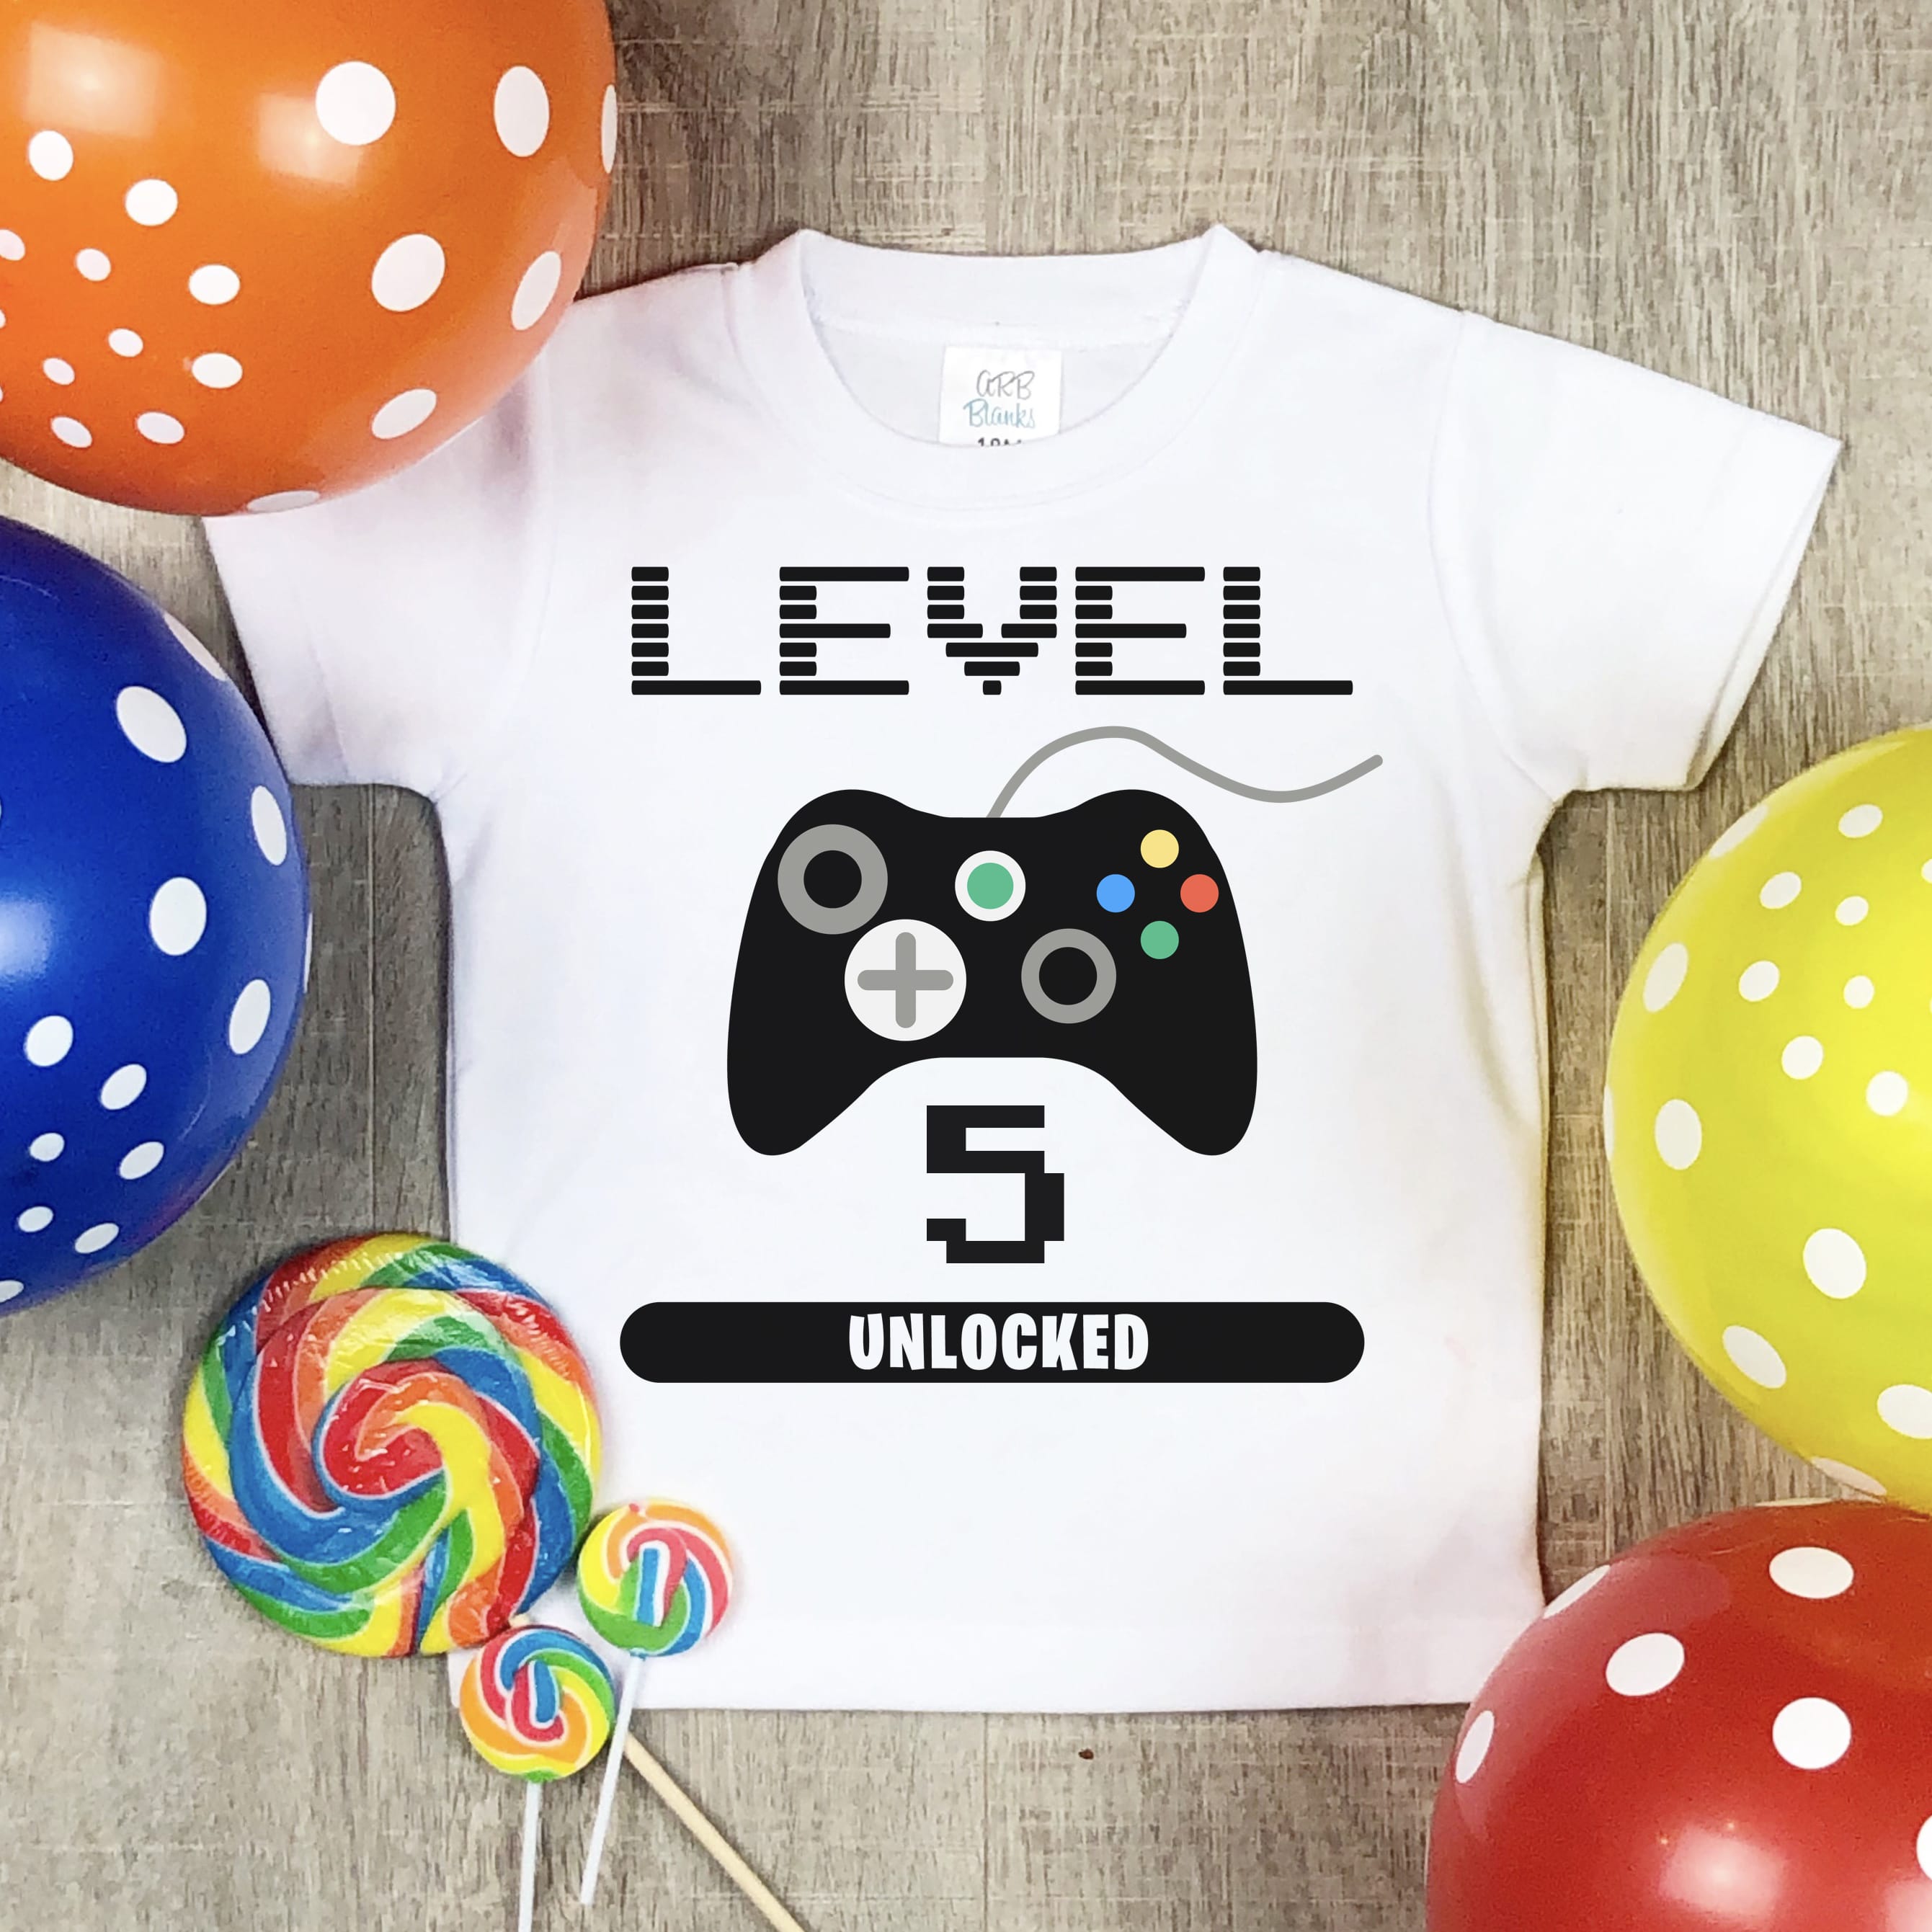 level 5 gaming svg file on tshirt with candy and balloons